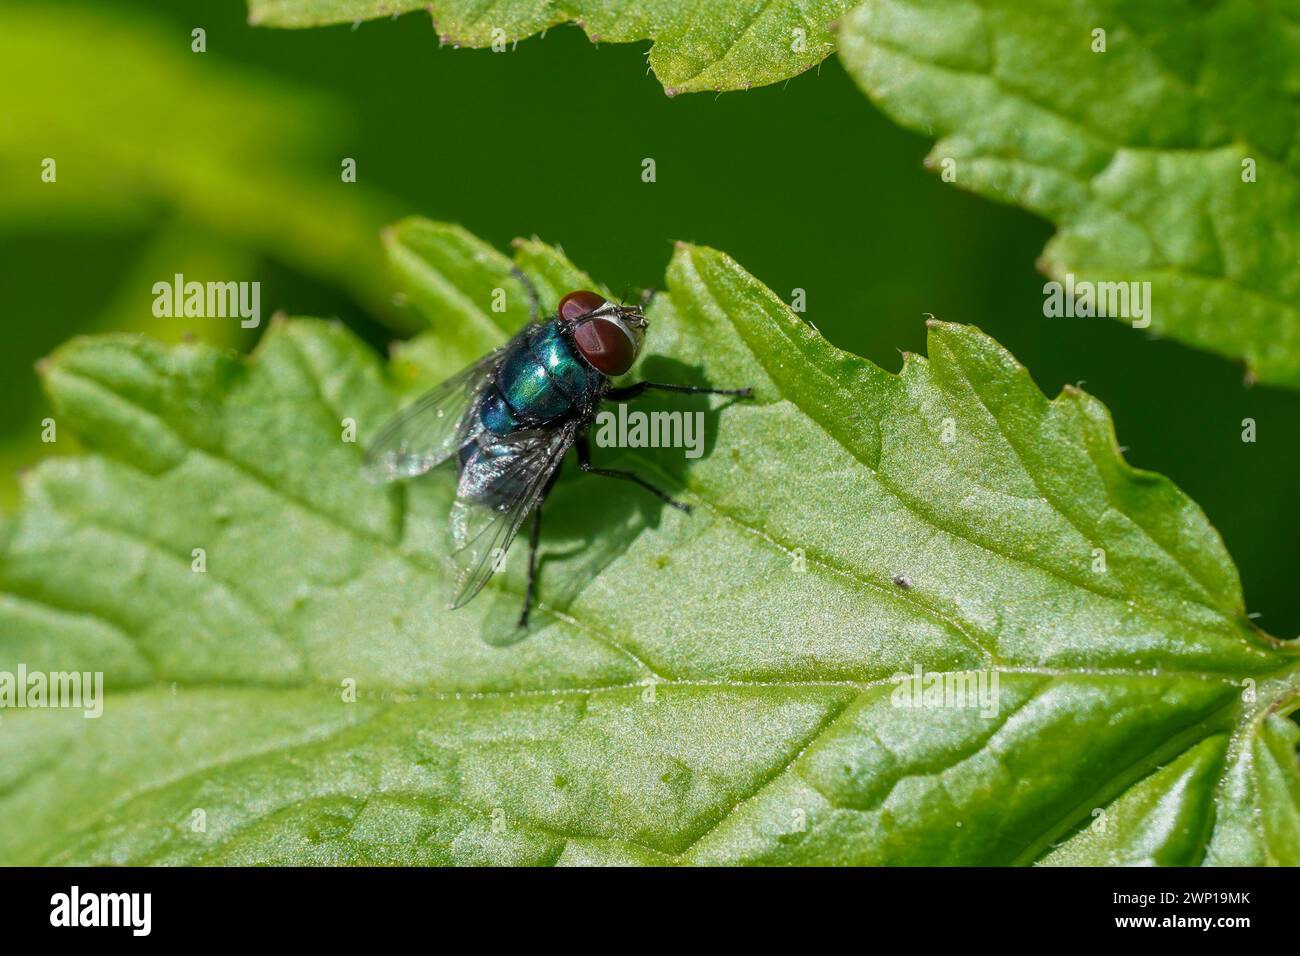 Common green bottle fly, Lucilia sericata on a leaf in spring, Spain. Stock Photo